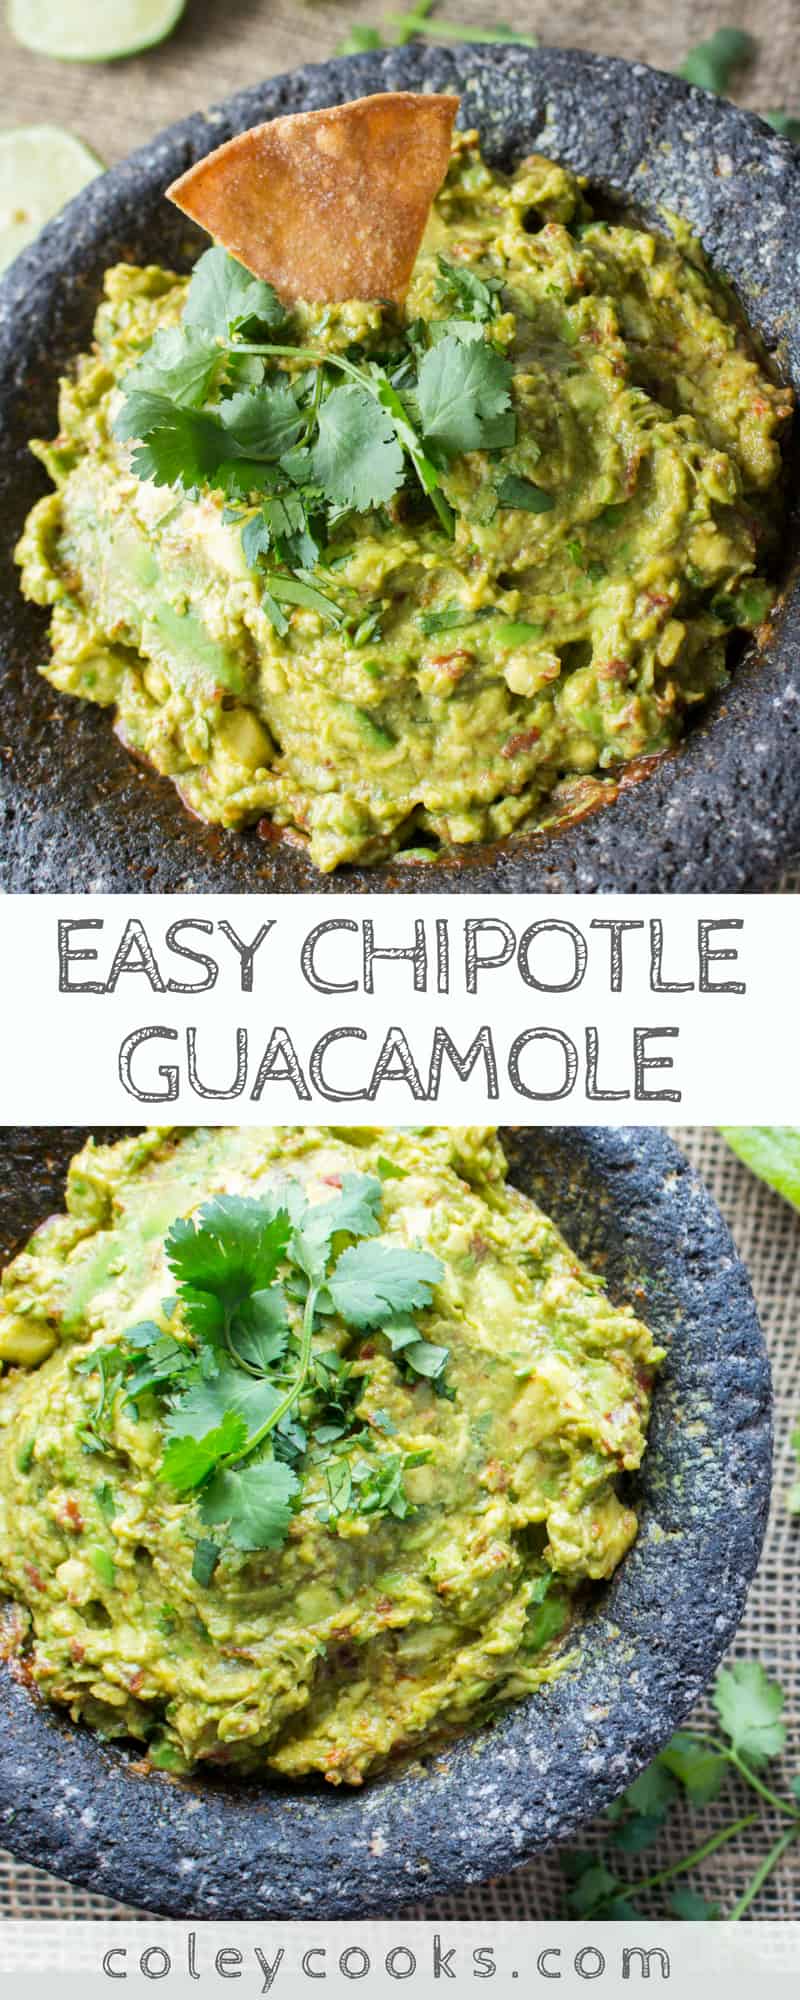 EASY CHIPOTLE GUACAMOLE | Easy guacamole recipe made with creamy avocados and spicy chipotle peppers! Perfect as a dip or on tacos, nachos, quesadillas or your favorite Mexican recipe. #appetizer #guacamole #Mexican #avocado #recipe | ColeyCooks.com